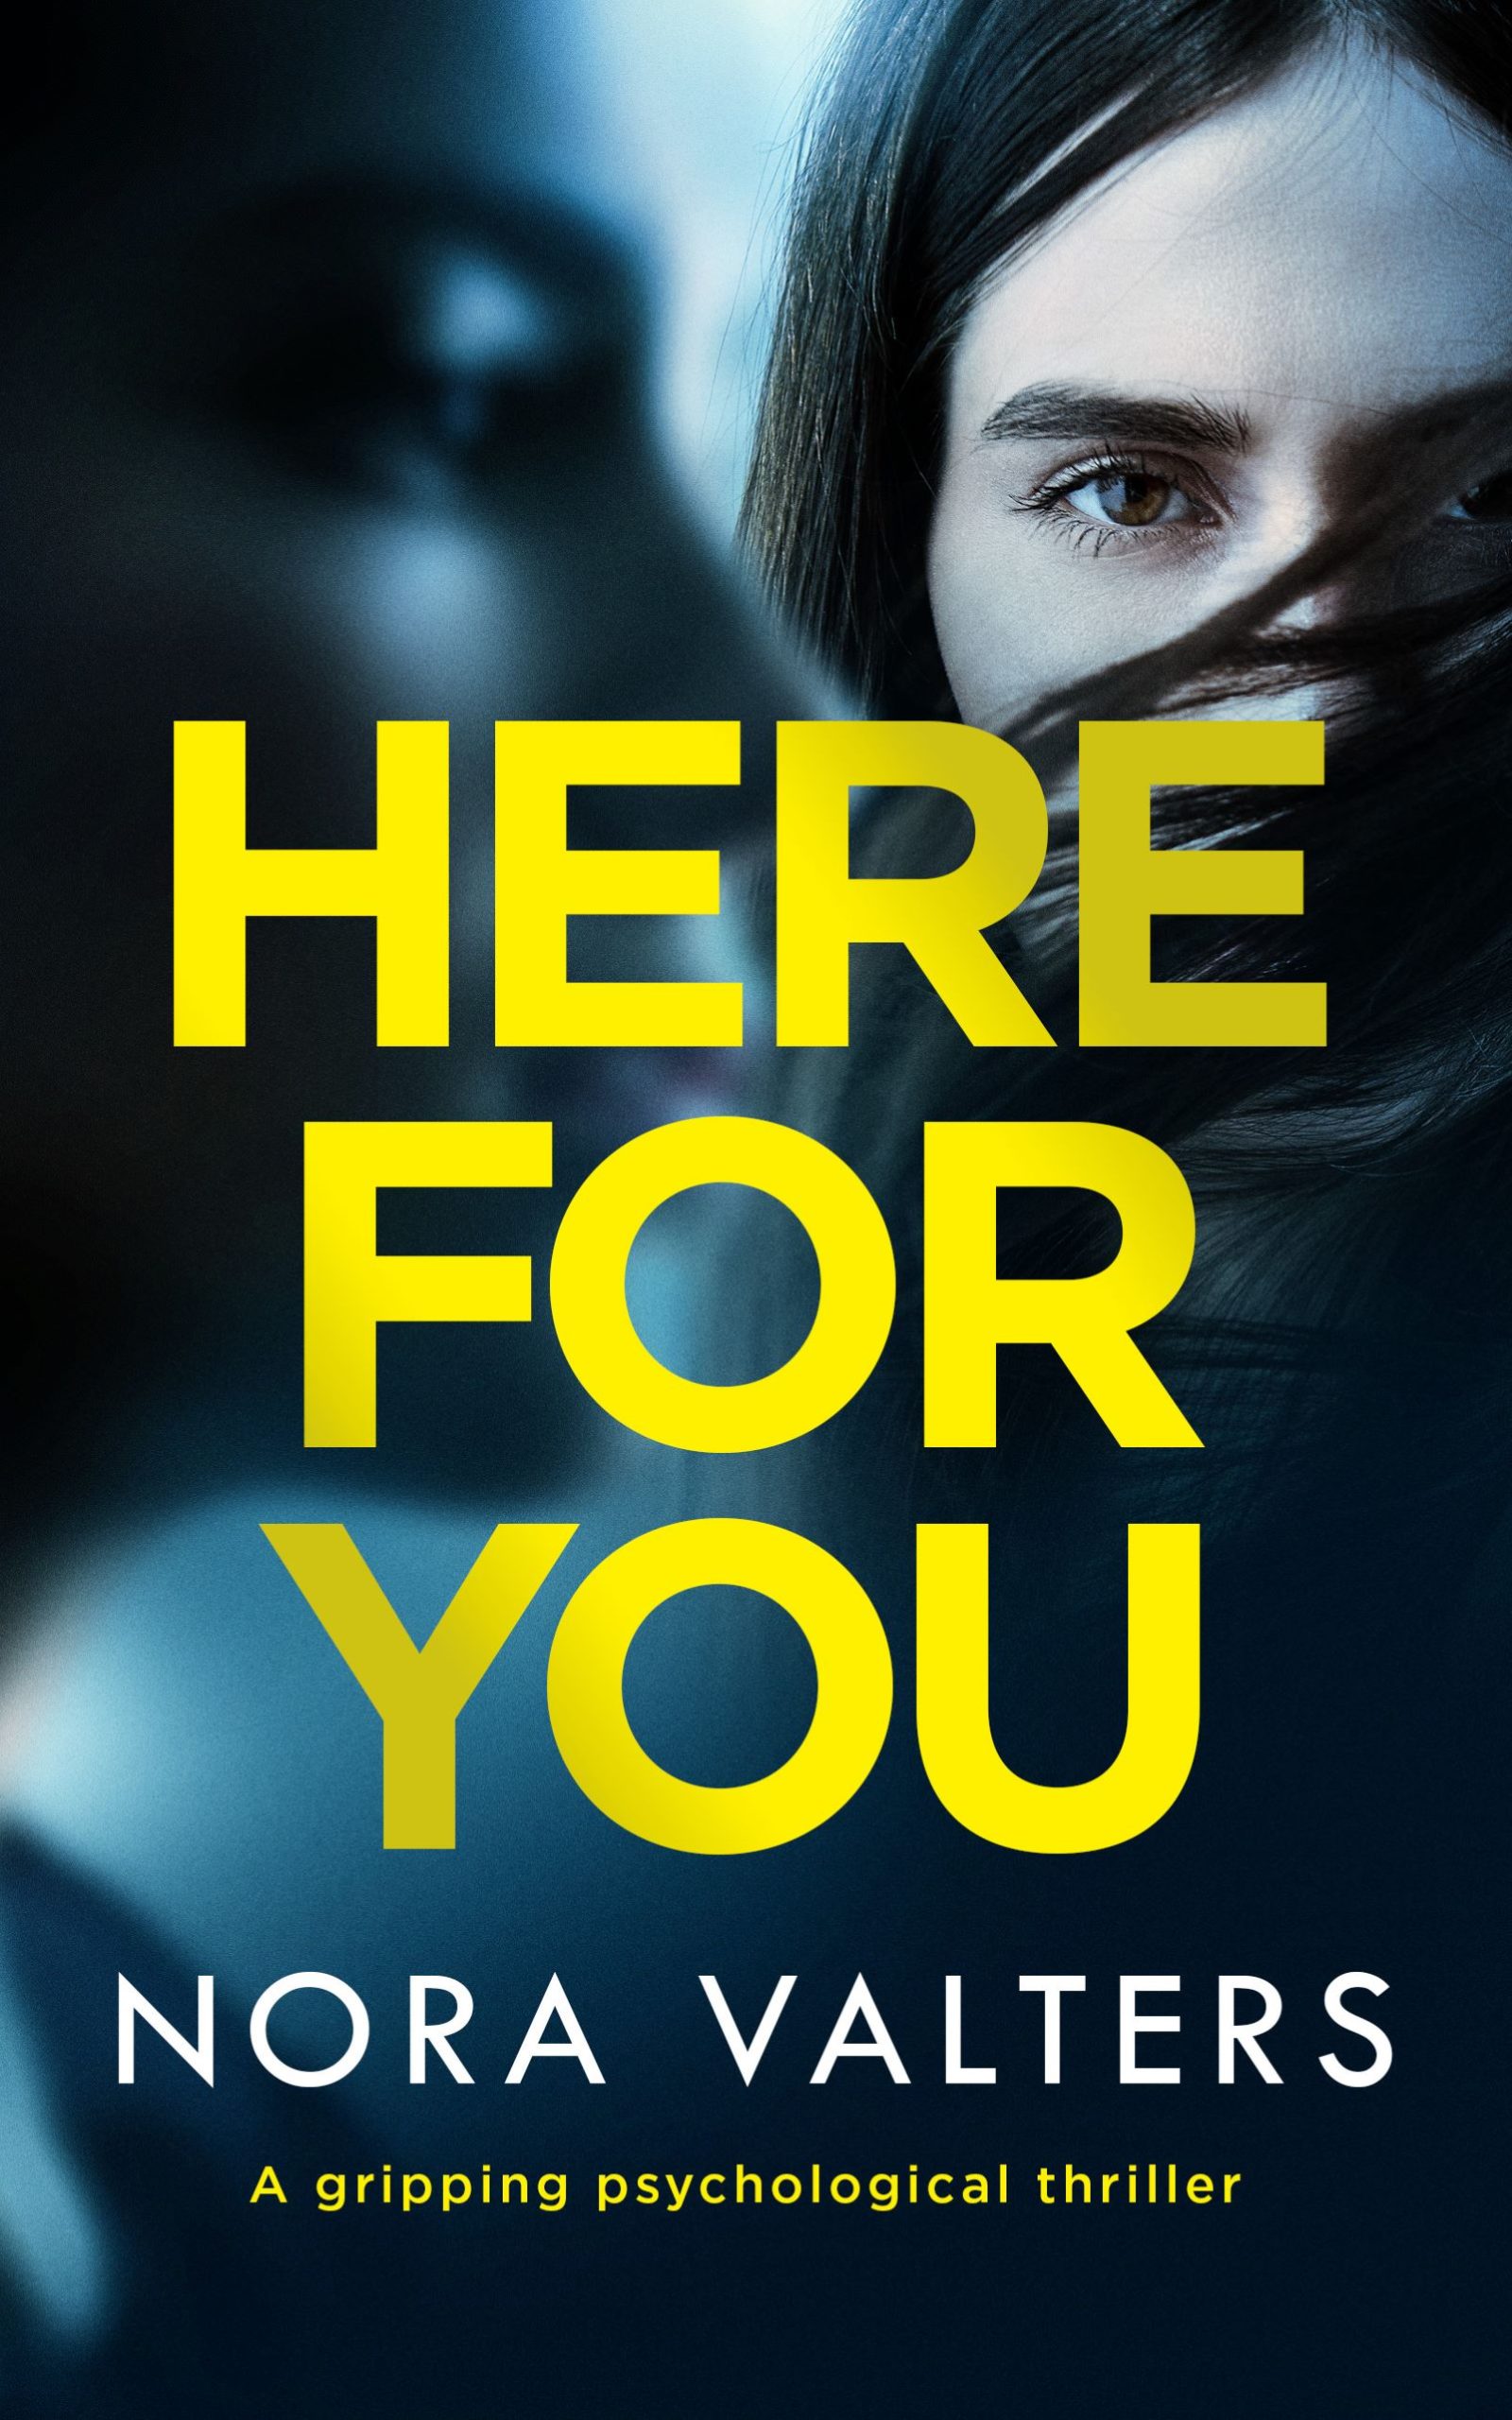 NORA VALTERS NEW RELEASE – HERE FOR YOU